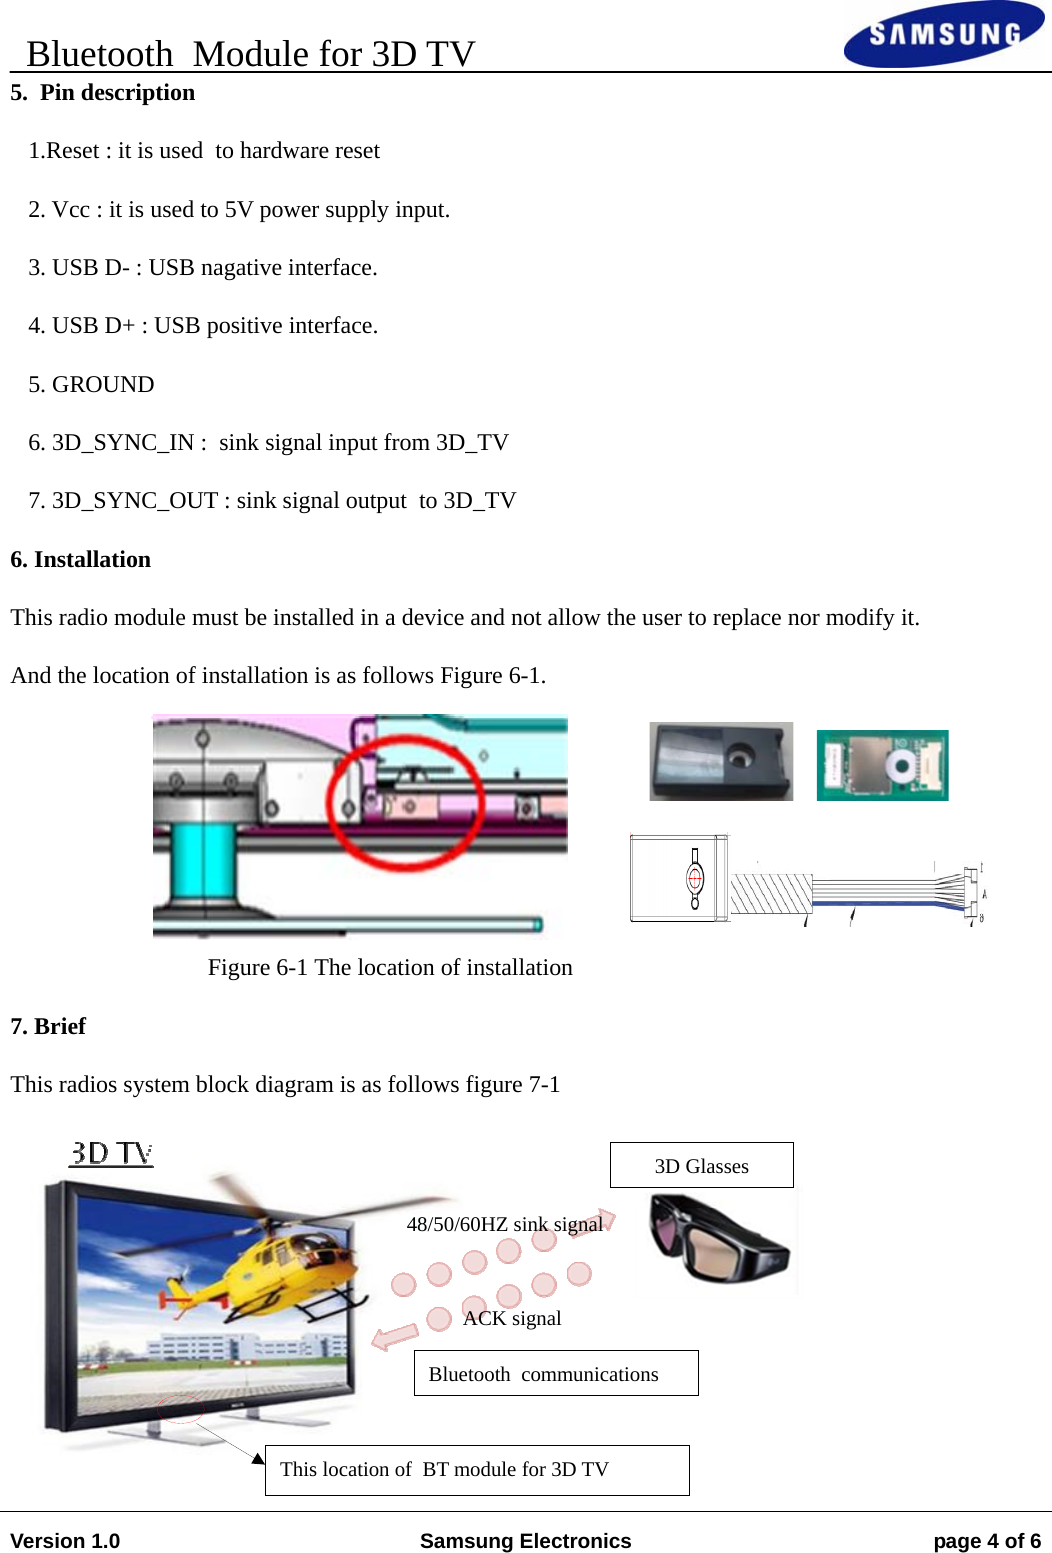    Bluetooth  Module for 3D TV                                                                        Version 1.0  Samsung Electronics  page 4 of 6   5.  Pin description    1.Reset : it is used  to hardware reset    2. Vcc : it is used to 5V power supply input.    3. USB D- : USB nagative interface.    4. USB D+ : USB positive interface.    5. GROUND    6. 3D_SYNC_IN :  sink signal input from 3D_TV    7. 3D_SYNC_OUT : sink signal output  to 3D_TV 6. Installation This radio module must be installed in a device and not allow the user to replace nor modify it. And the location of installation is as follows Figure 6-1.      Figure 6-1 The location of installation 7. Brief This radios system block diagram is as follows figure 7-1        Bluetooth  communications 3D Glasses 48/50/60HZ sink signal ACK signal This location of  BT module for 3D TV 